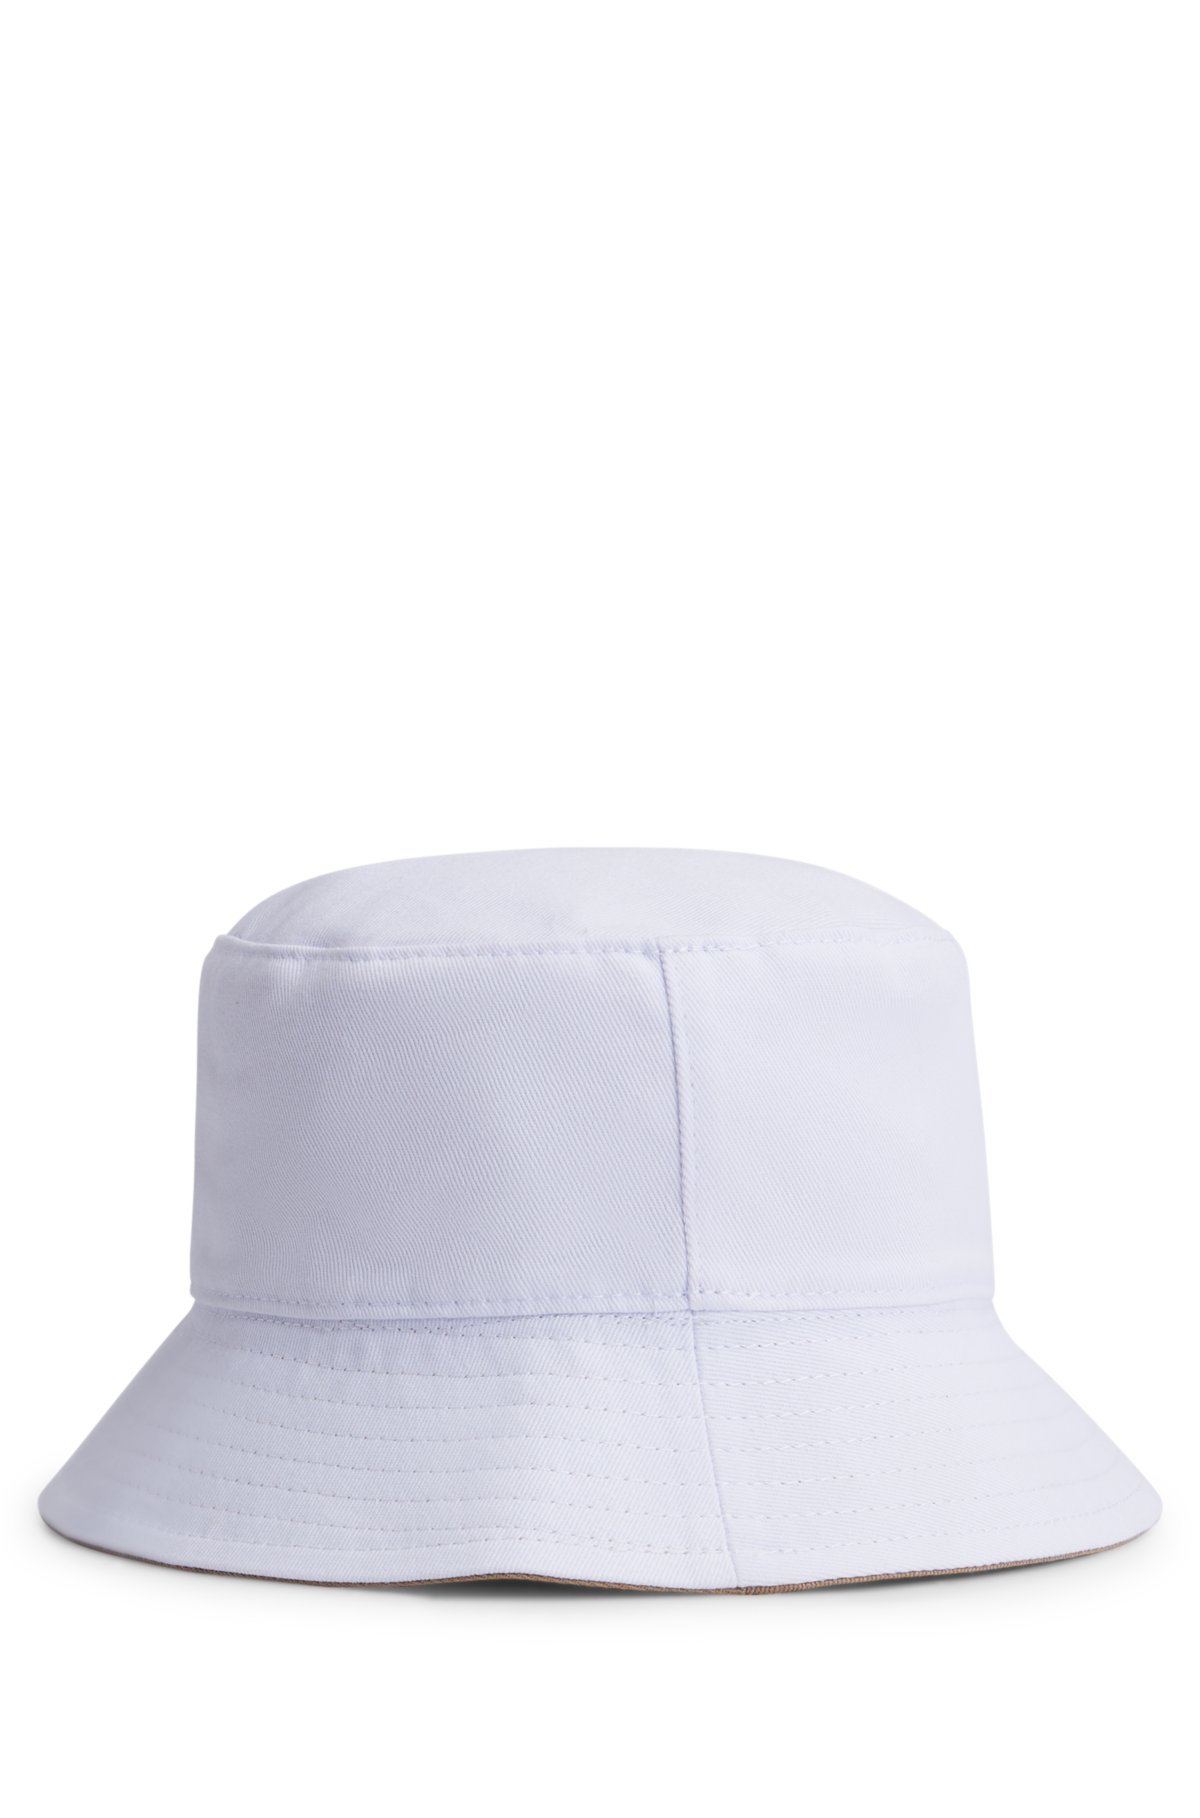 Kids' reversible bucket hat with signature details, Brown